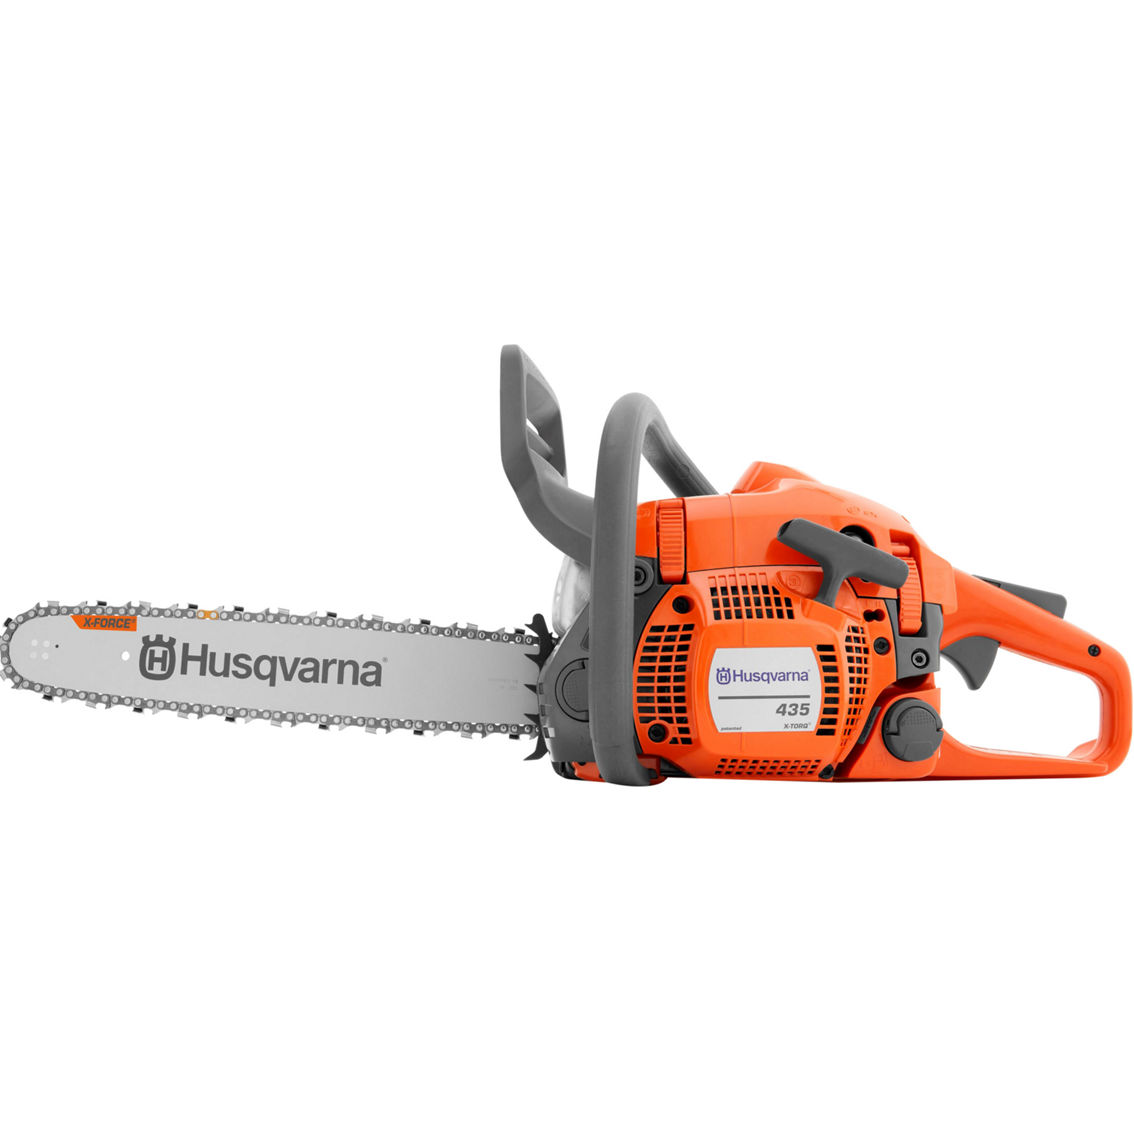 Husqvarna 435 Gas 16 in. Chainsaw RTL BX - Image 3 of 4